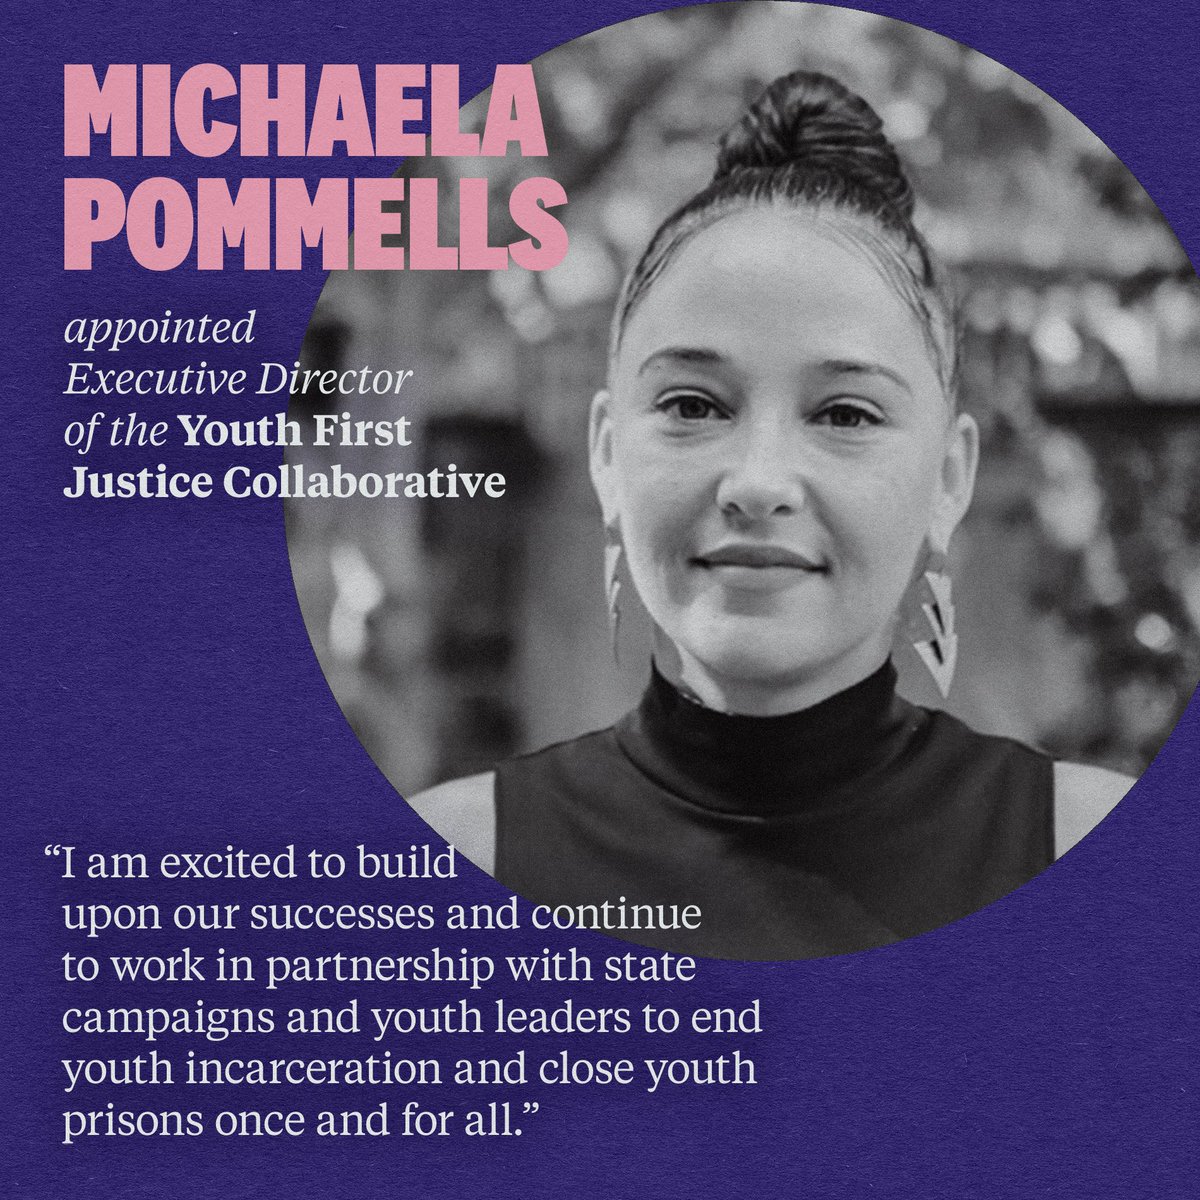 When organizing for youth justice it’s imperative to let youth voices lead the way. Michaela Pommells understands what it means to put youth first and I am so excited she has been chosen to be Executive Director of the Youth First Justice Collaborative! @NoKidsInPrison